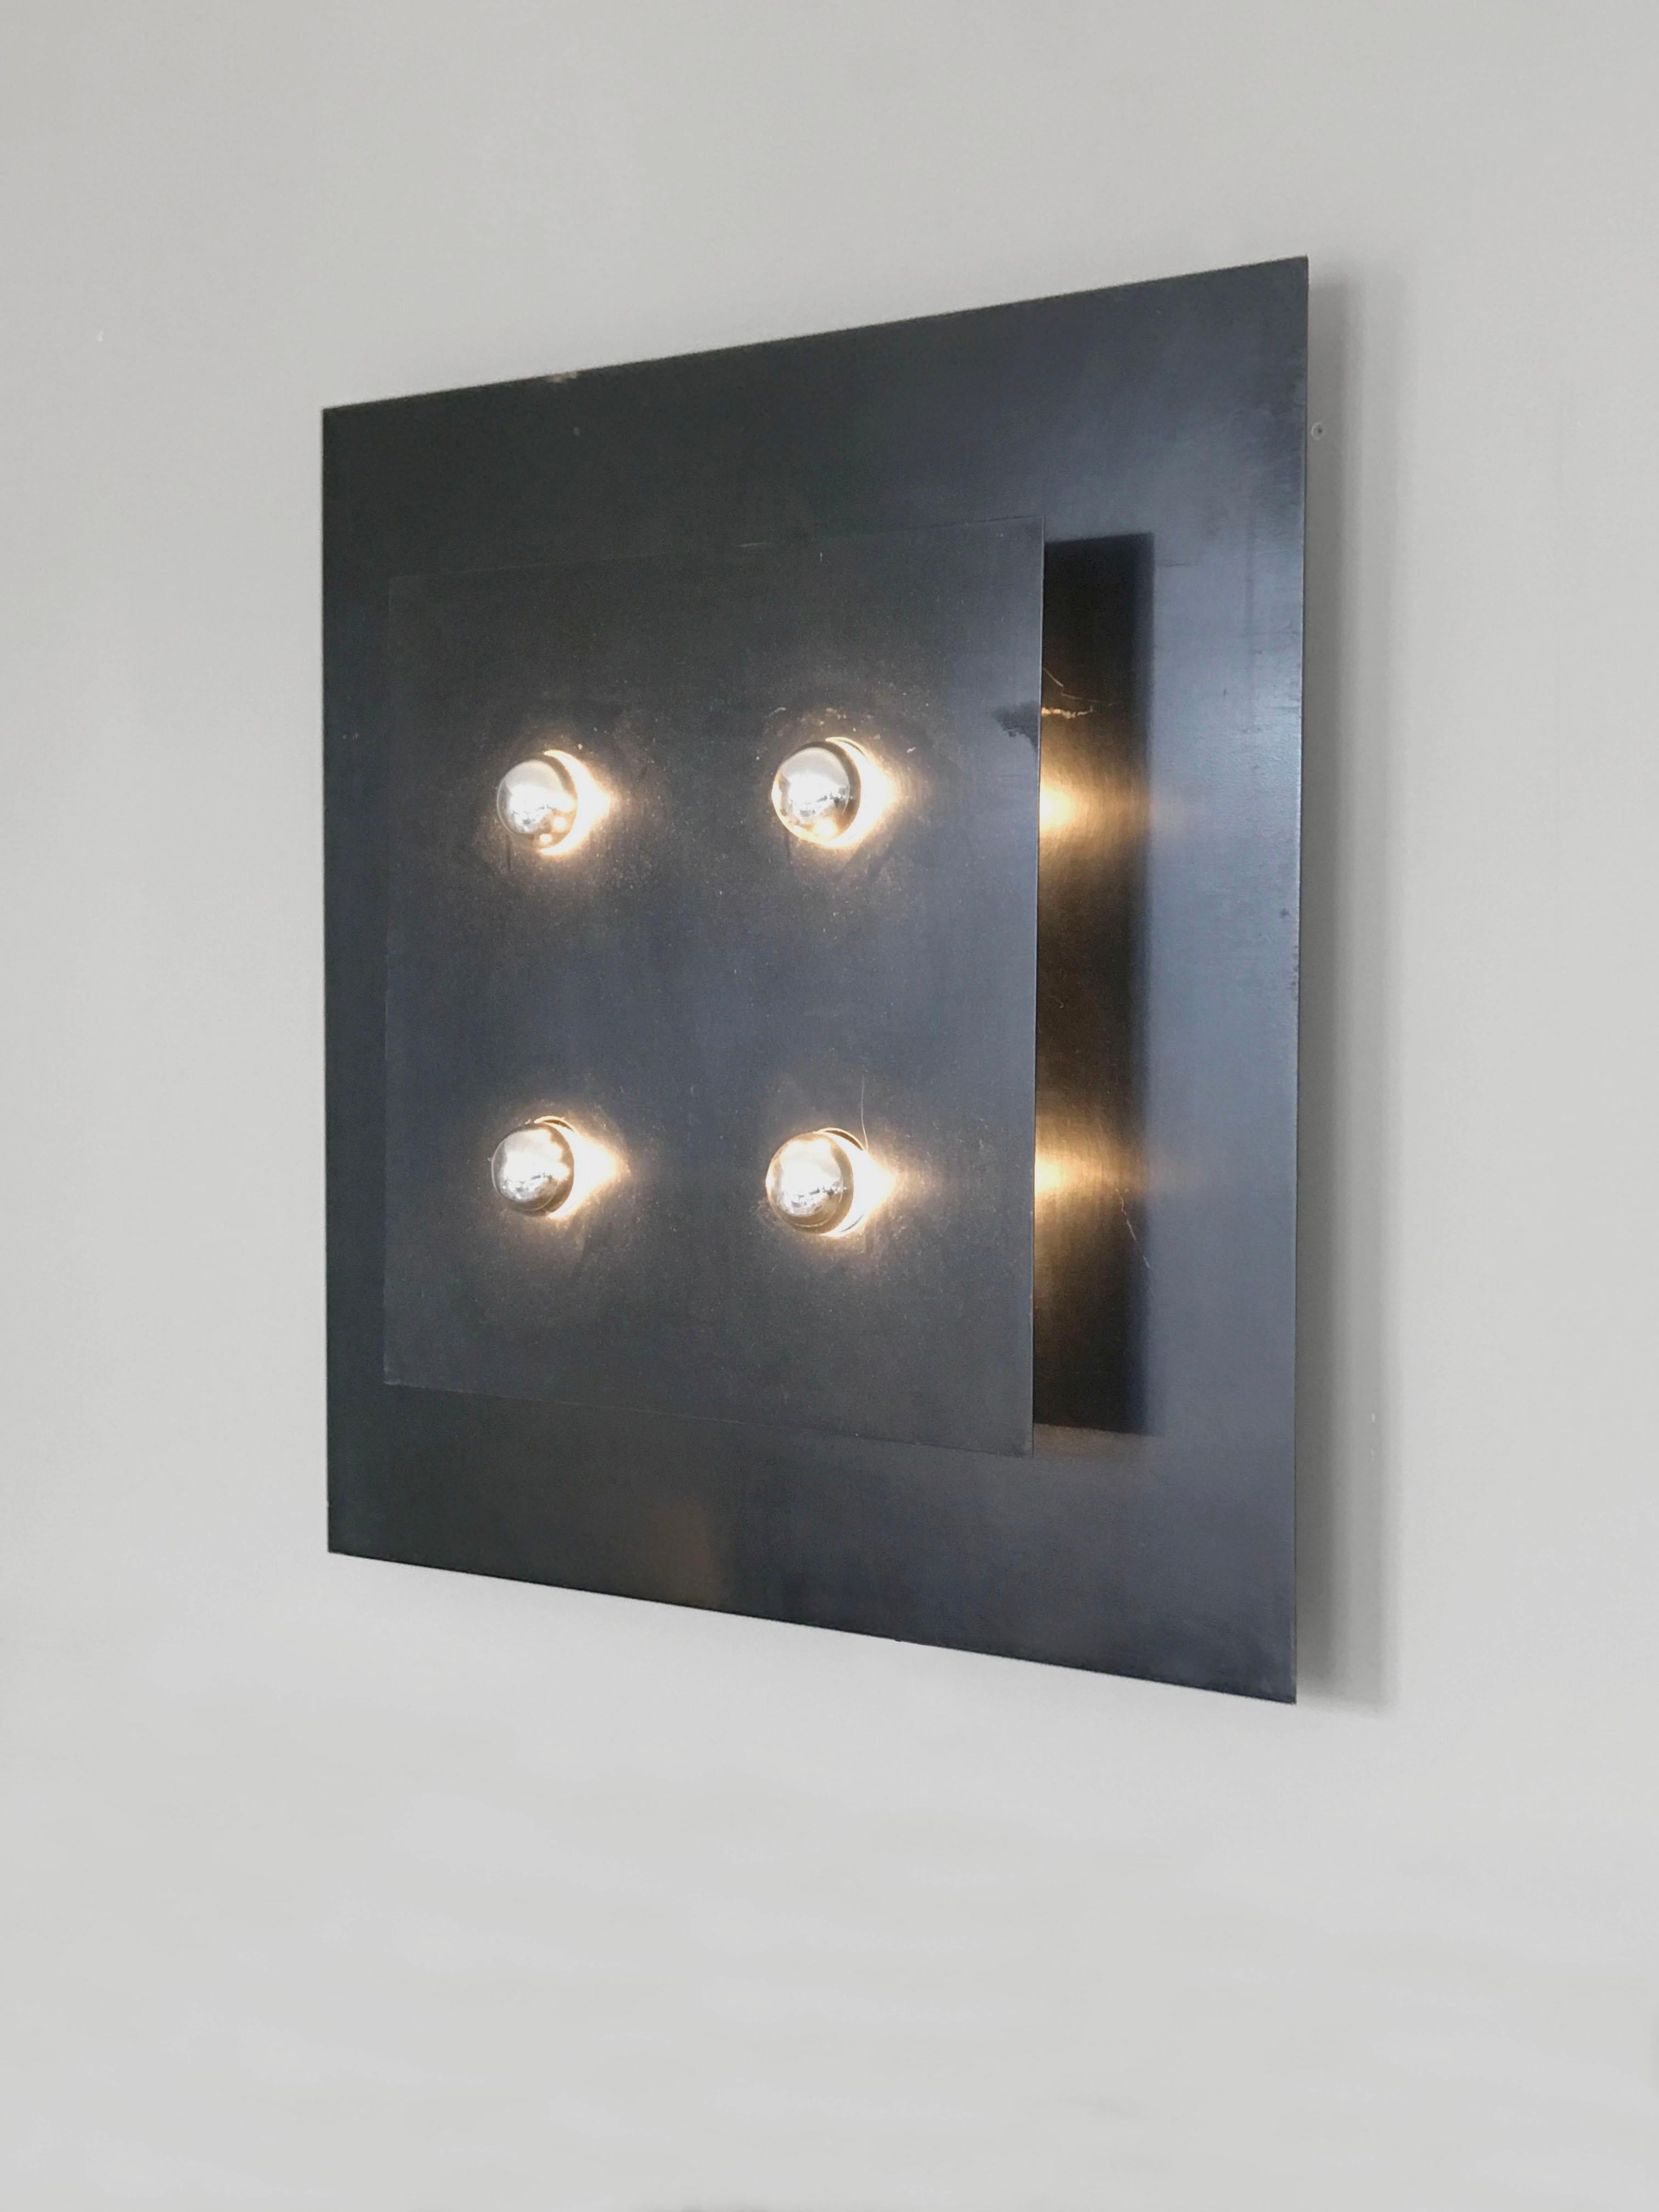 An authentic and important wall applique Radical, Post-Modernist, Minimalist, consisting in 2 superposed squares perforated by 4 circular openings allowing 4 indirect lightnings. This is a abstract geometric lighting sculpture, one of the very rare